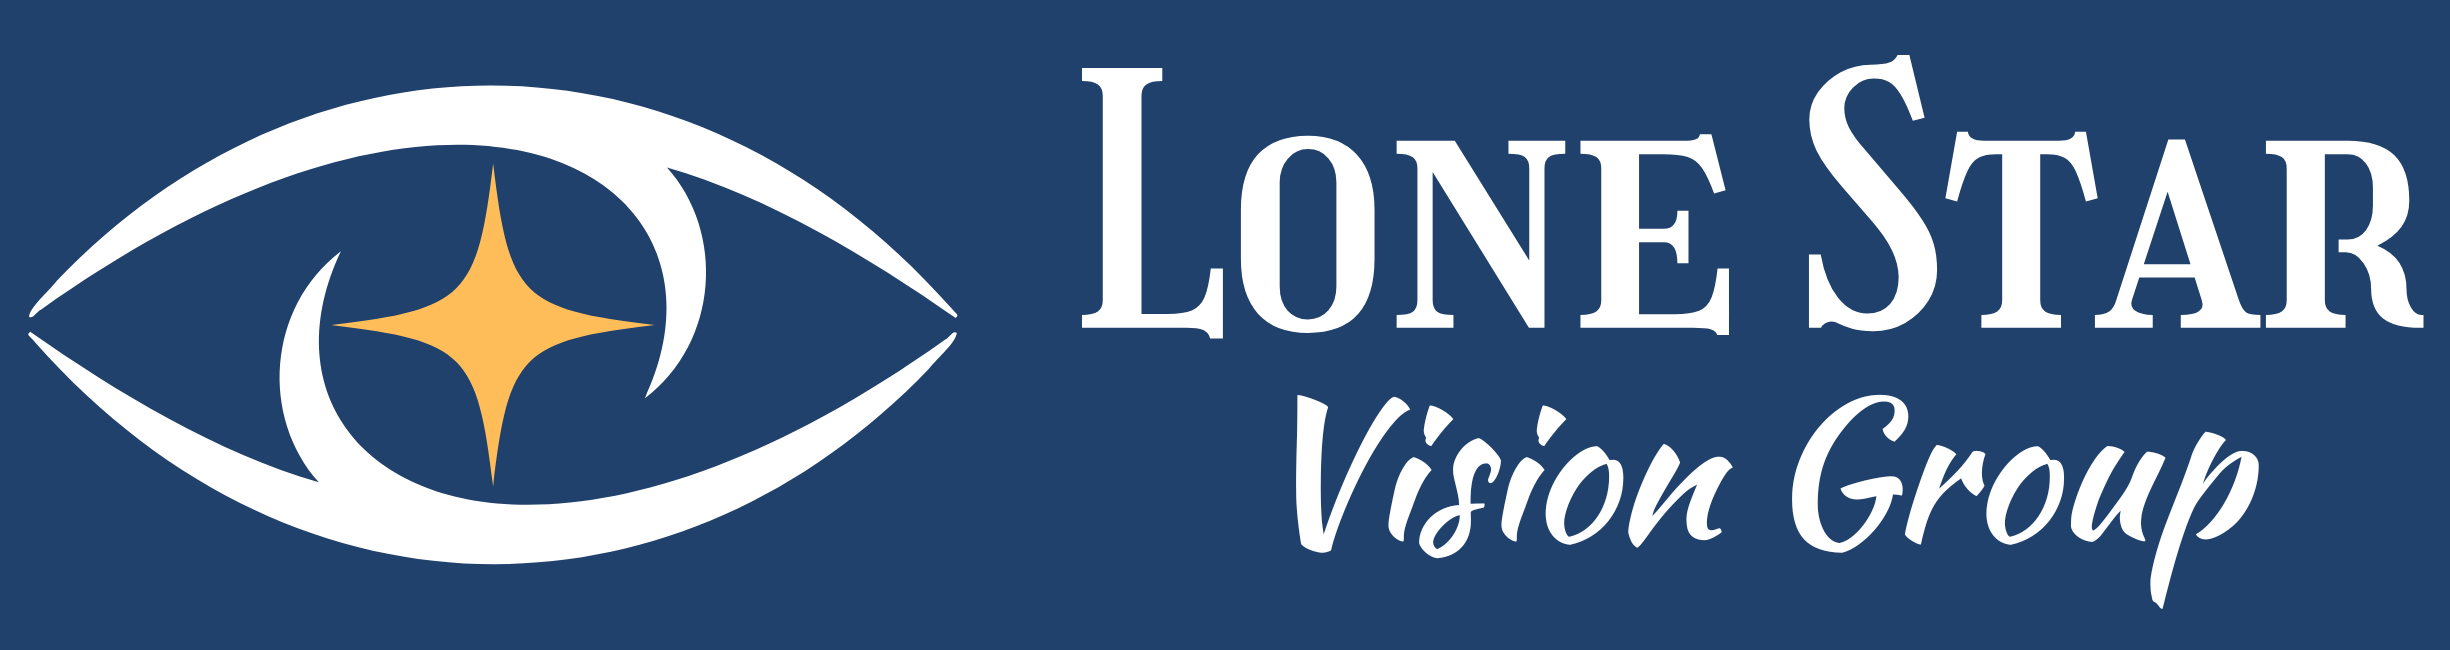 Lone Star Vision Group